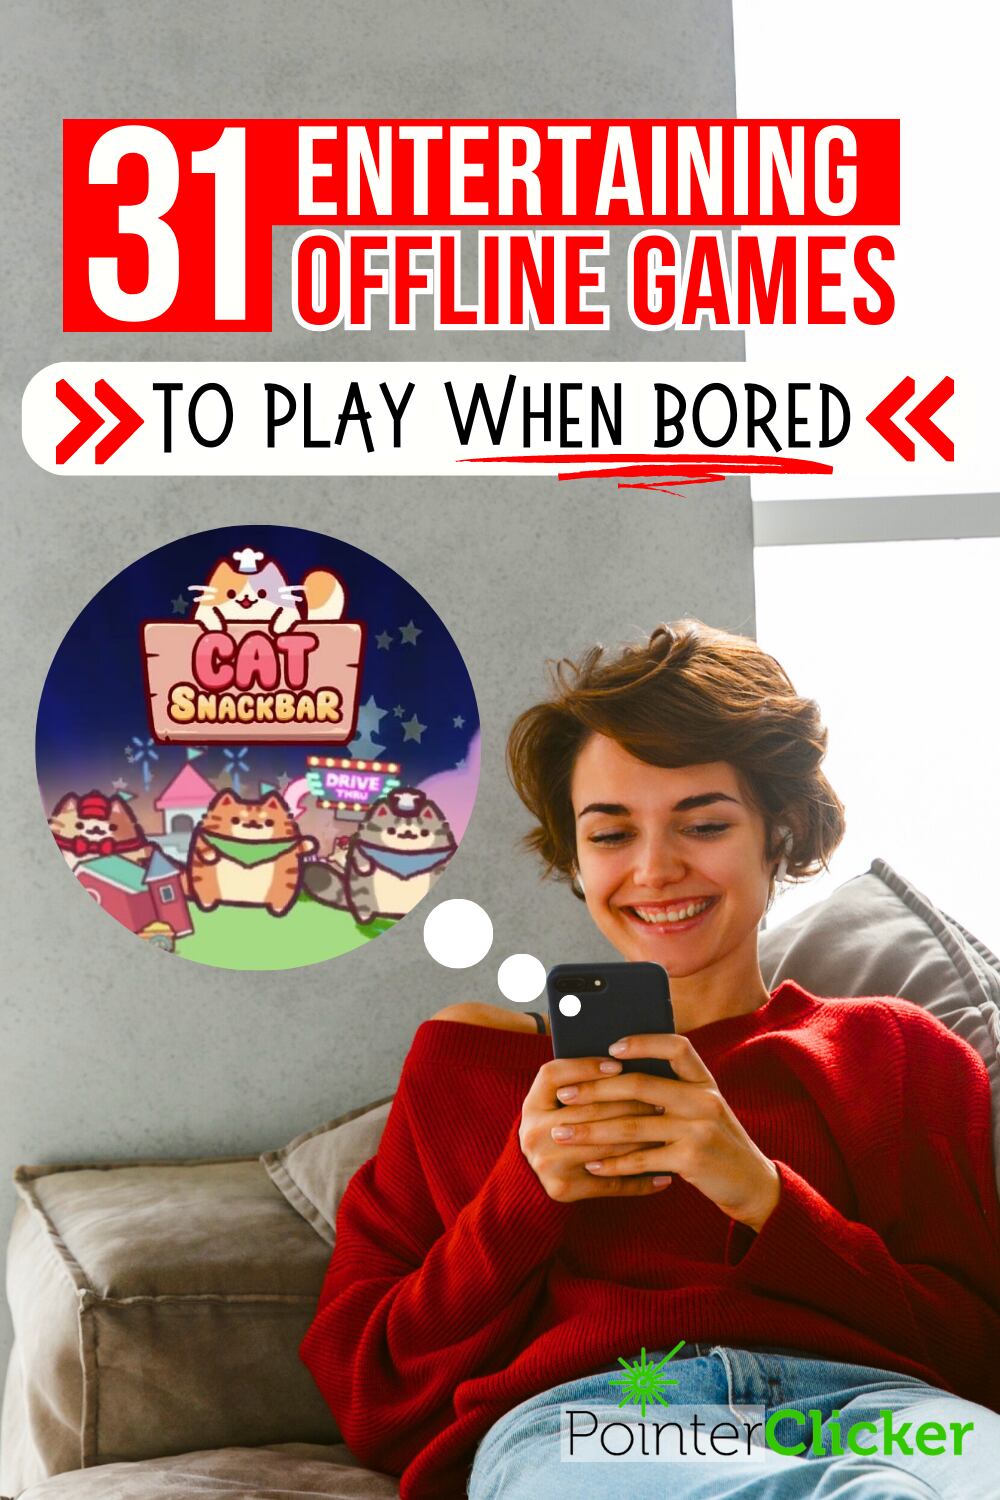 a female is lying on the couch and playing on her phone, the words say '31 entertaining offline games to play when bored'